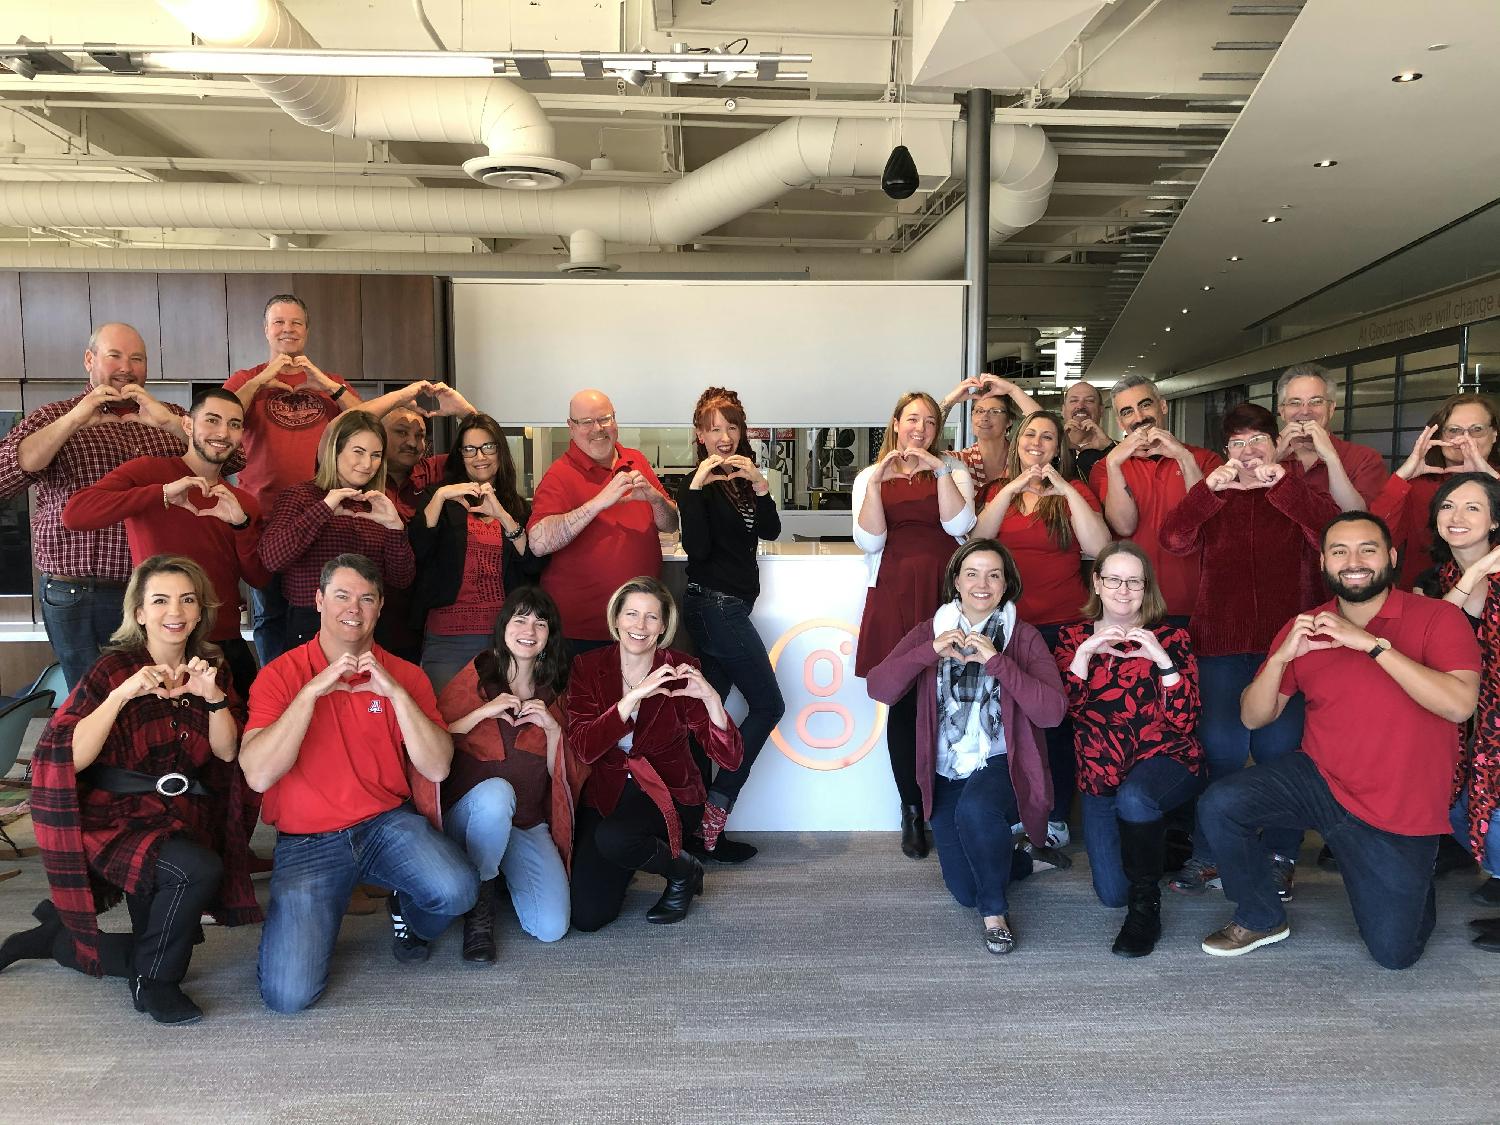 Our team celebrate Wear Red day in honor of stroke awareness.